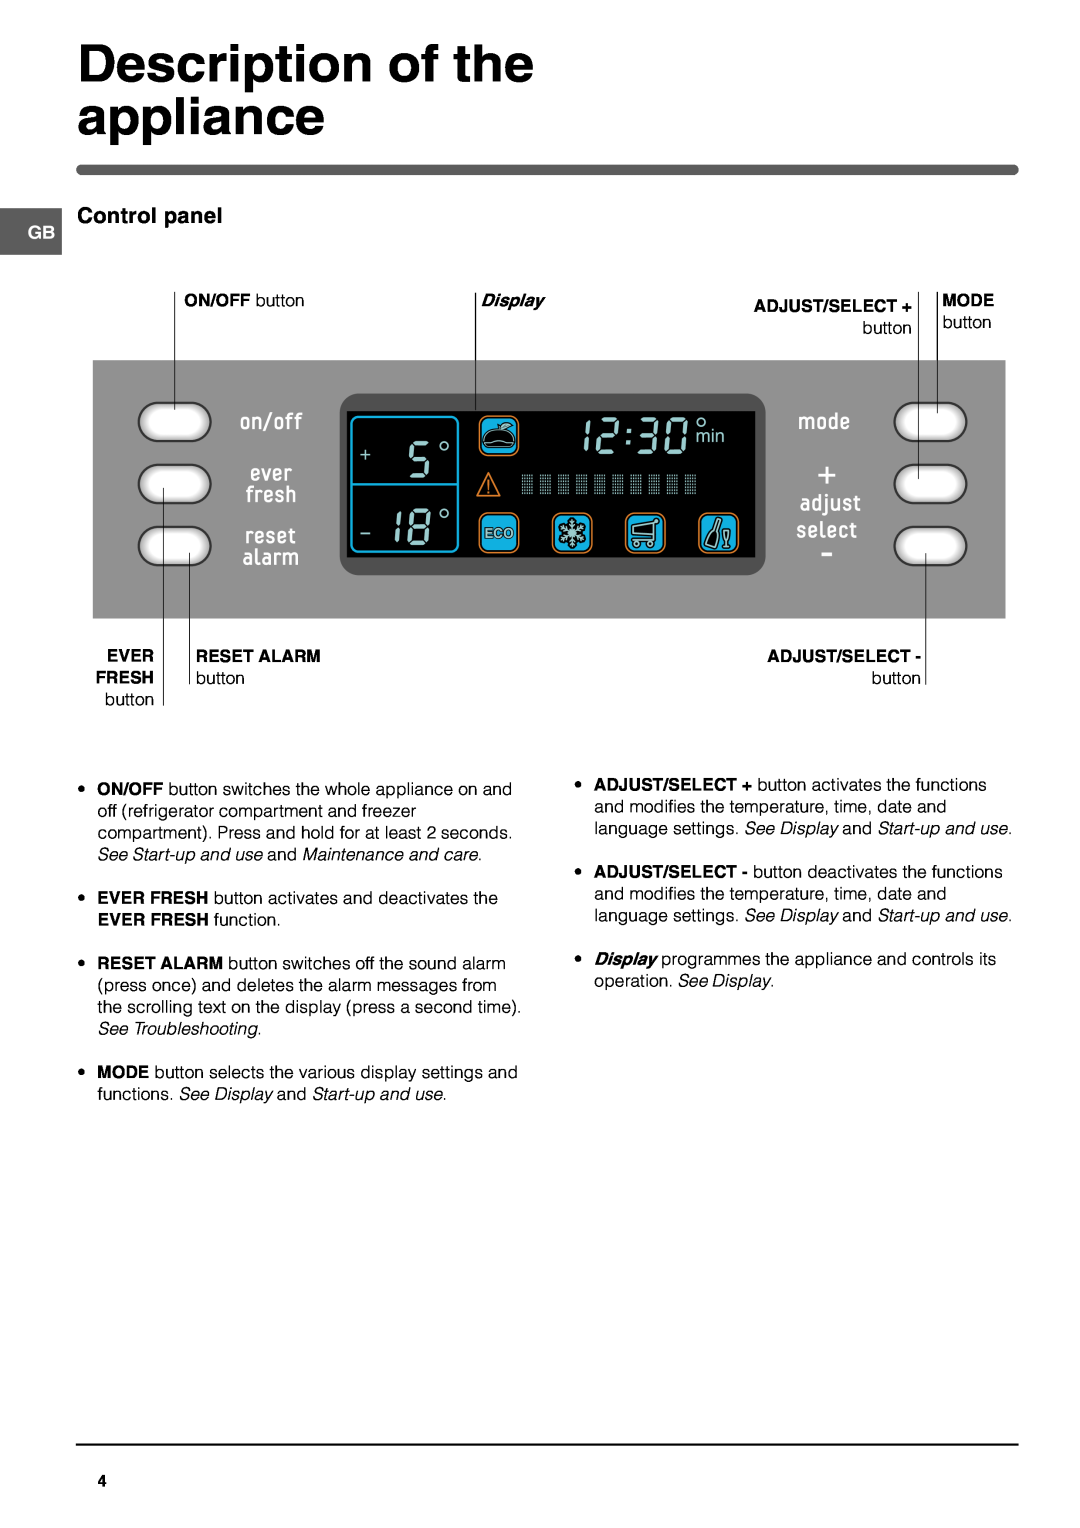 Hotpoint FFM48X Description of the appliance, ON/OFF button, Display, Mode, Ever Fresh, Reset Alarm, EVER FRESH function 